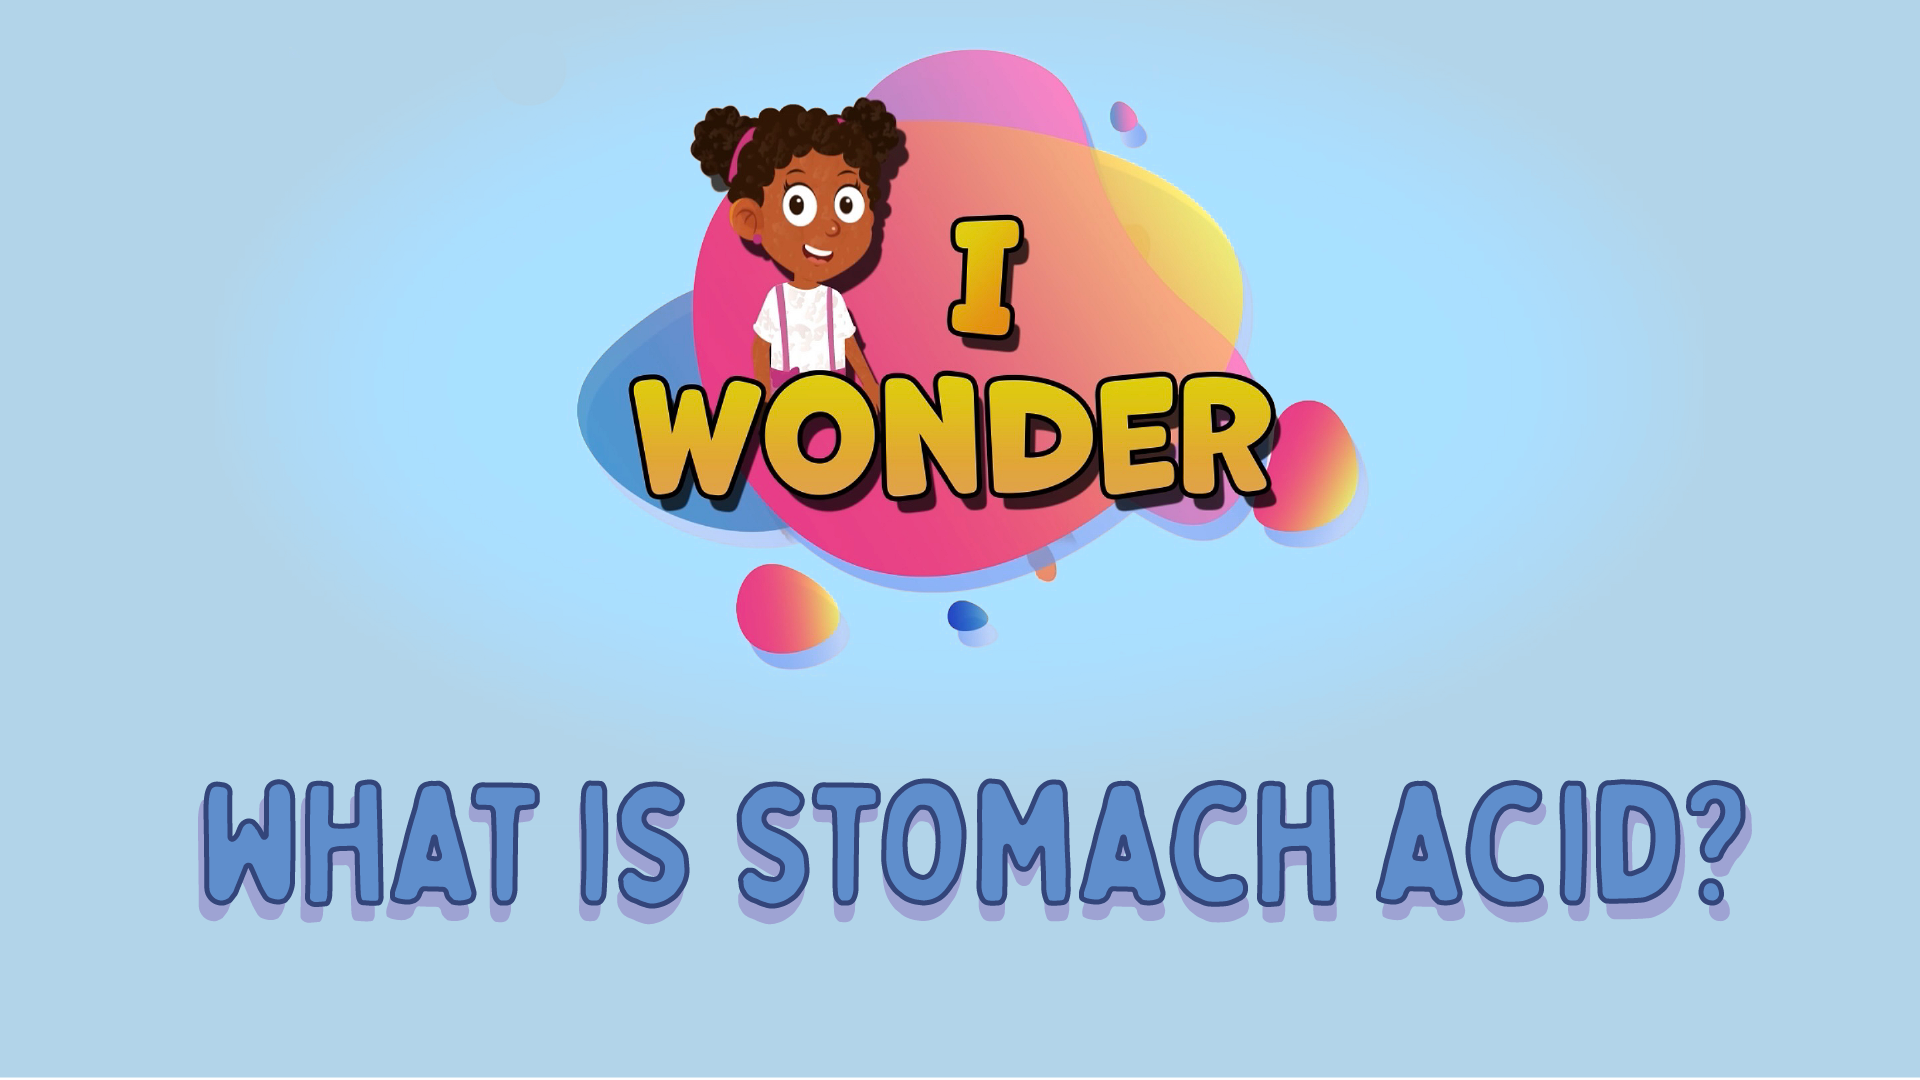 What Is Stomach Acid?